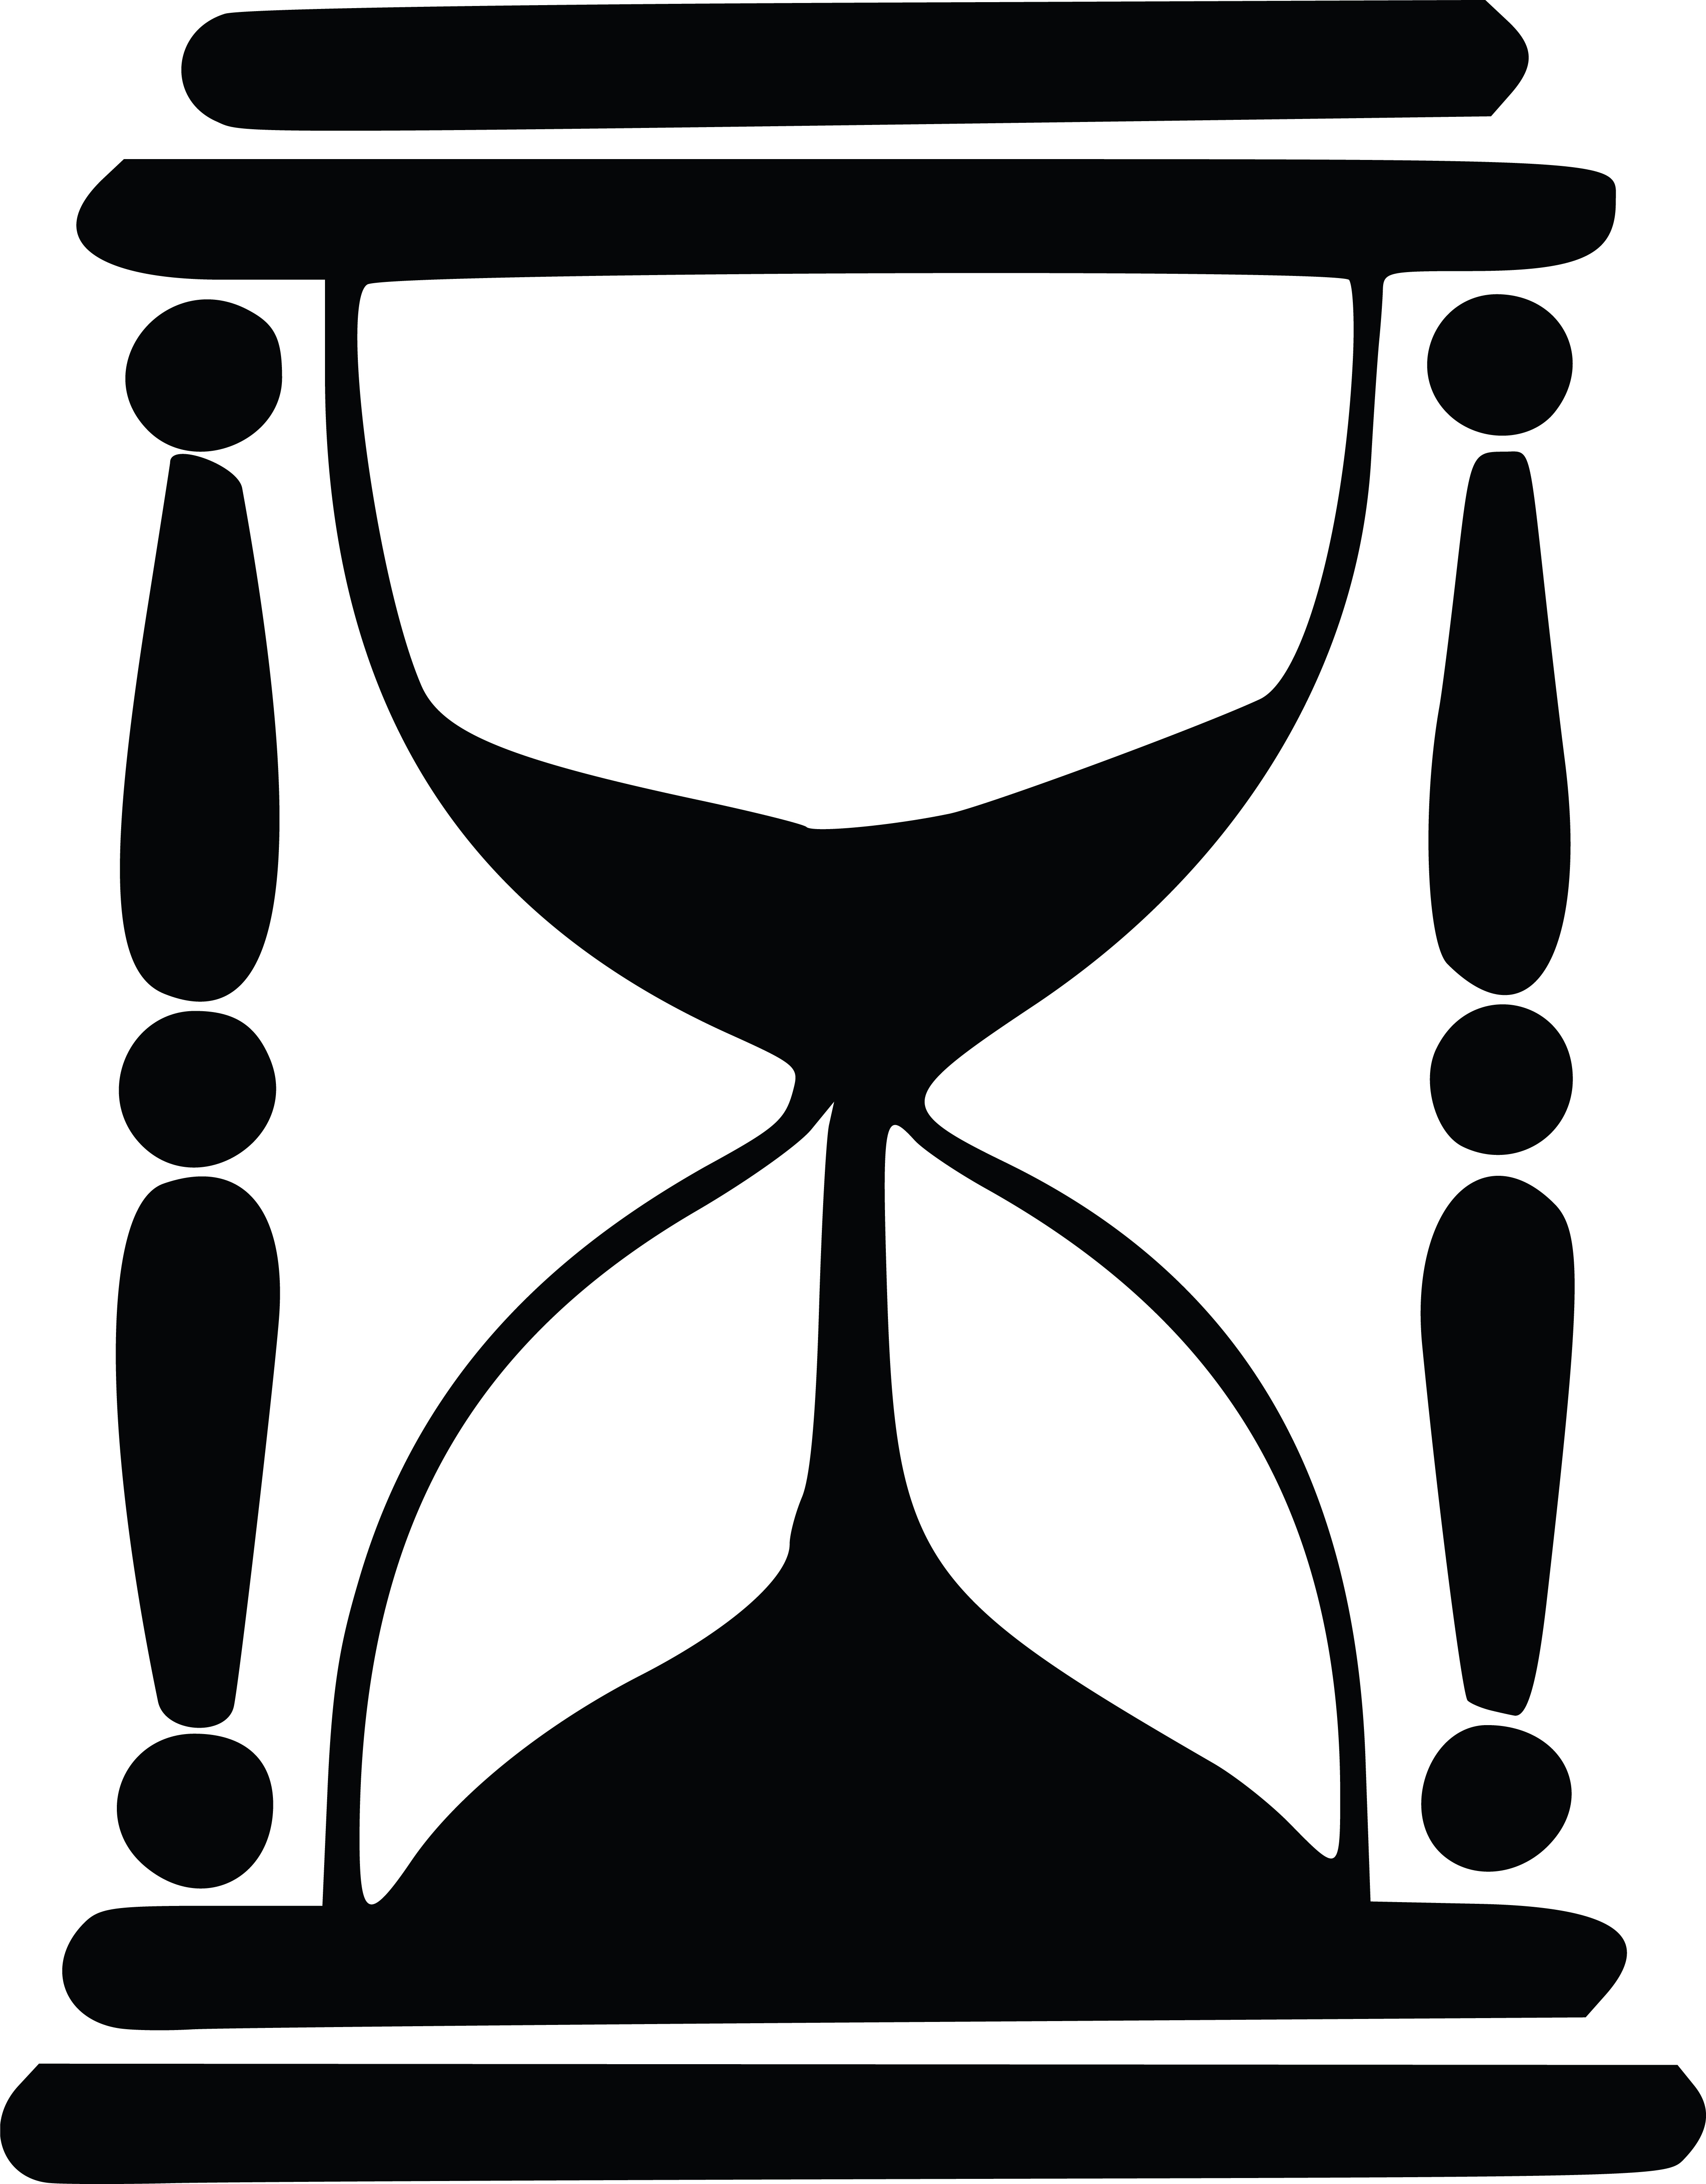 Free Clipart Of An hourglass